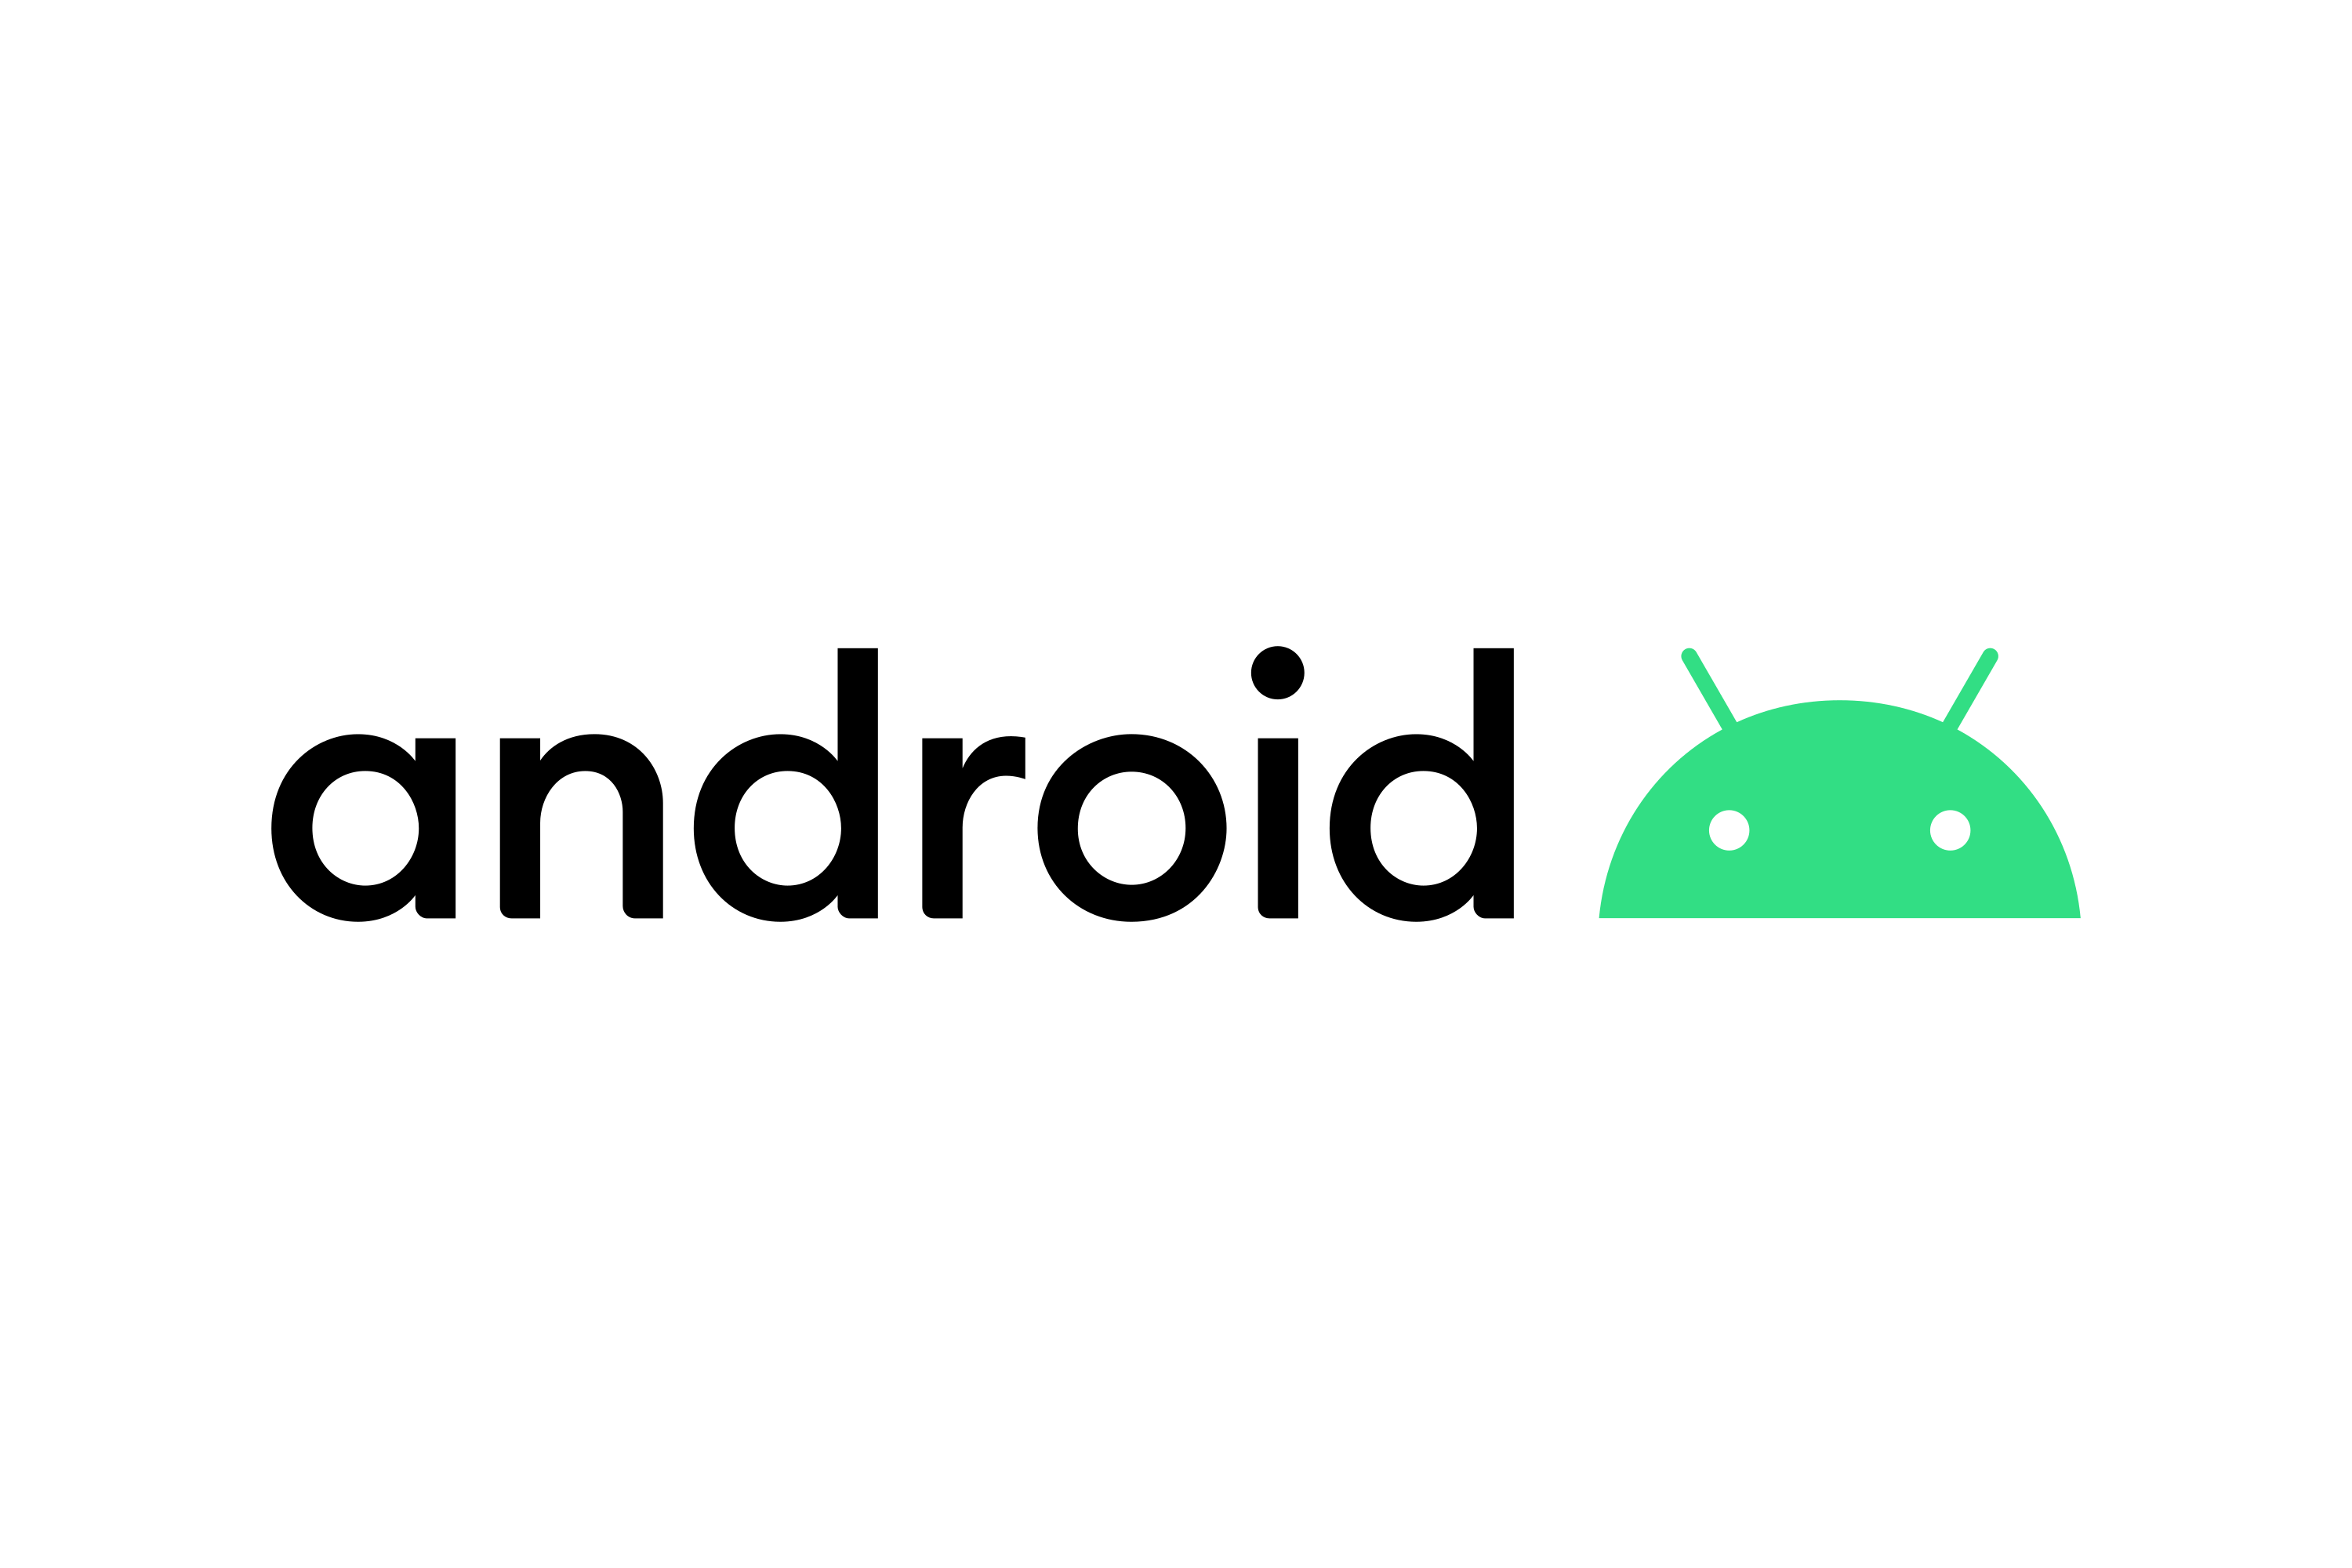 Download Download Android Logo in SVG Vector or PNG File Format ...